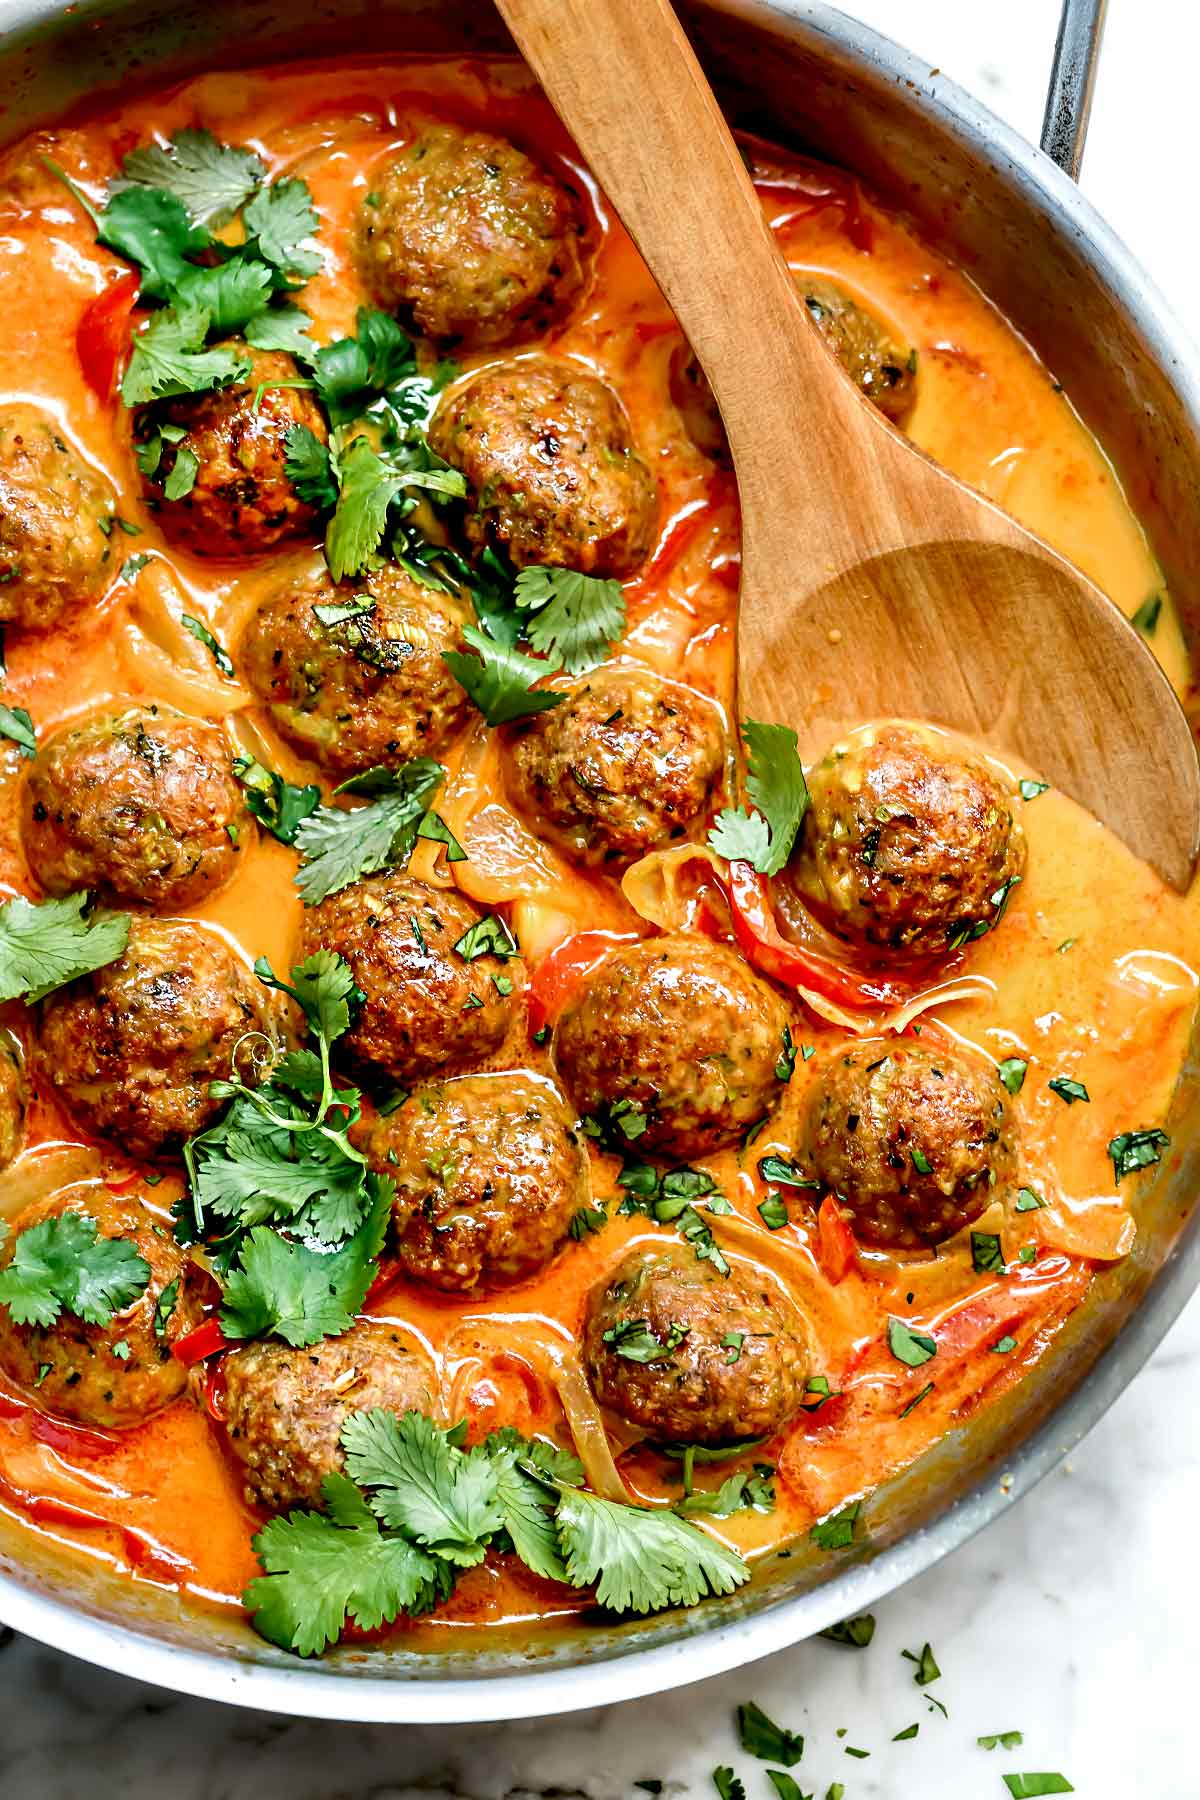 Thai Meatballs In Coconut Curry Sauce | foodiecrush.com #meatballs #turkey #healthy #recipe #curry #coconut #baked #easy #recipes #homememade